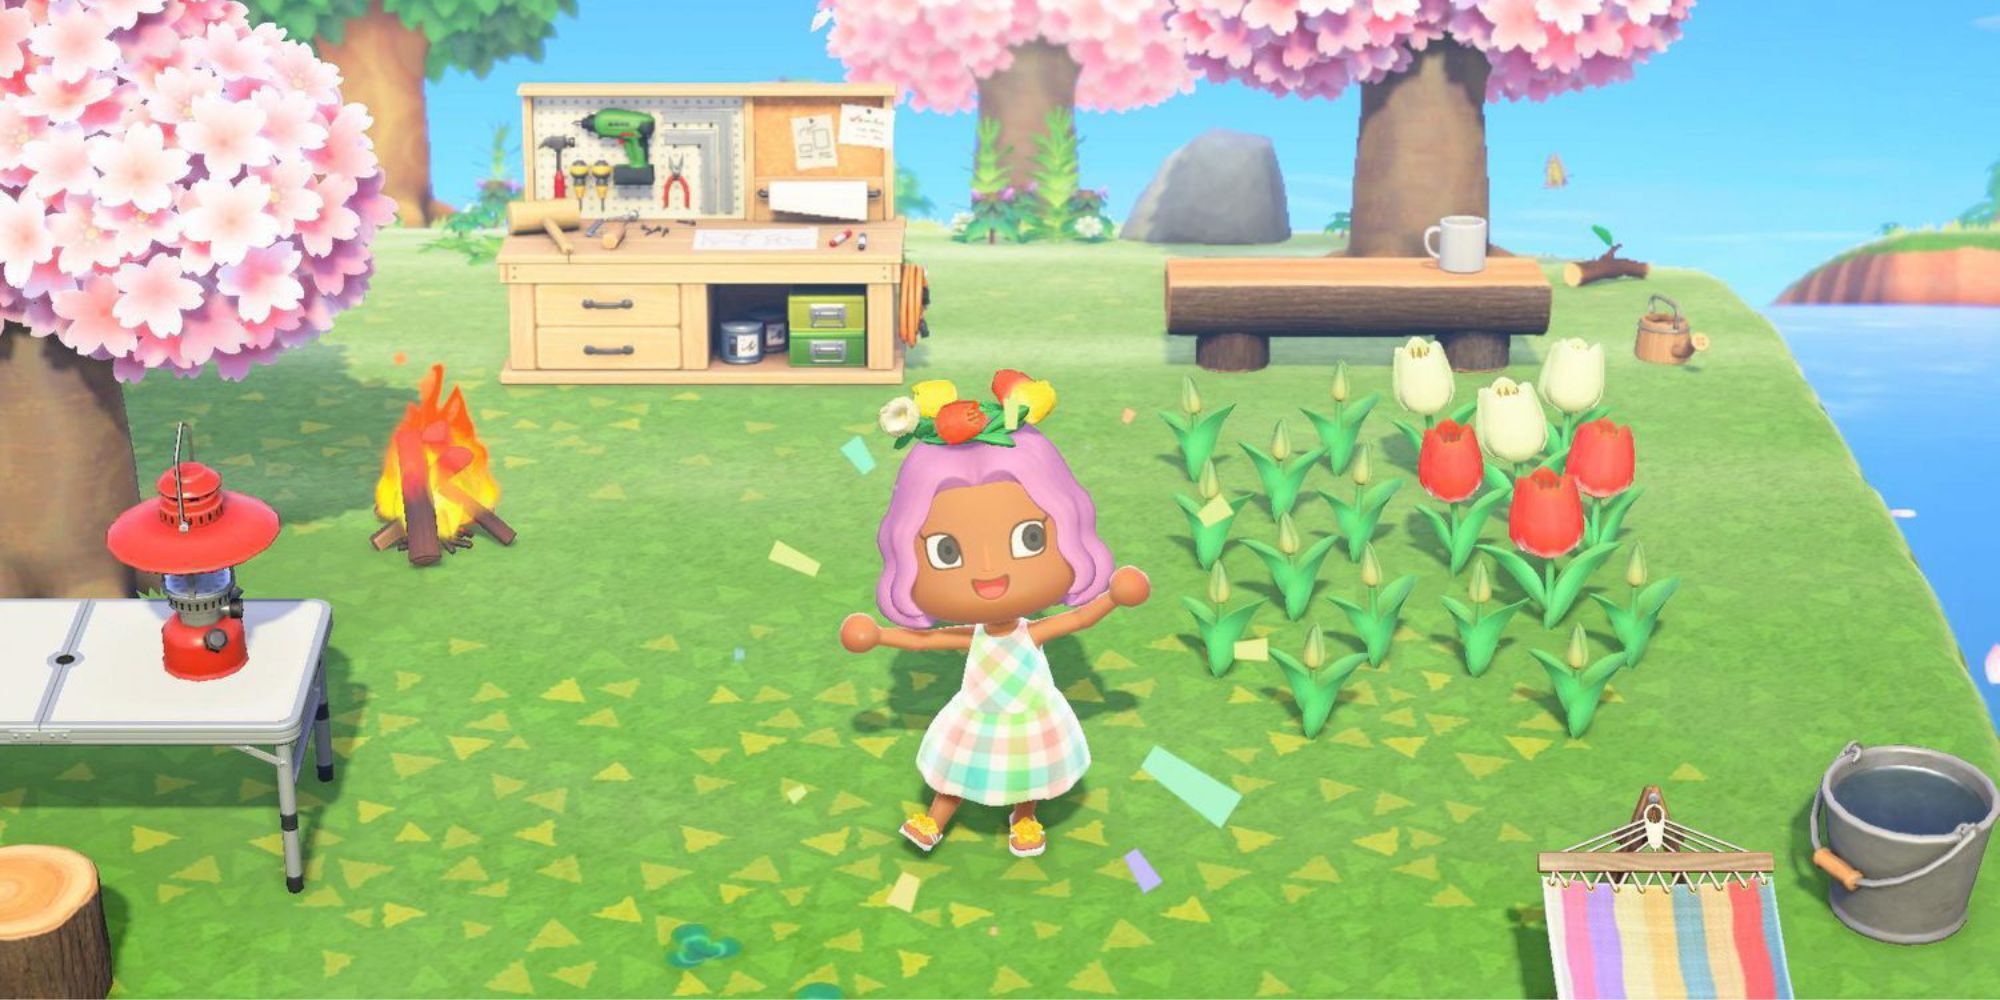 A villager celebrates on her island while wearing flowers on her head